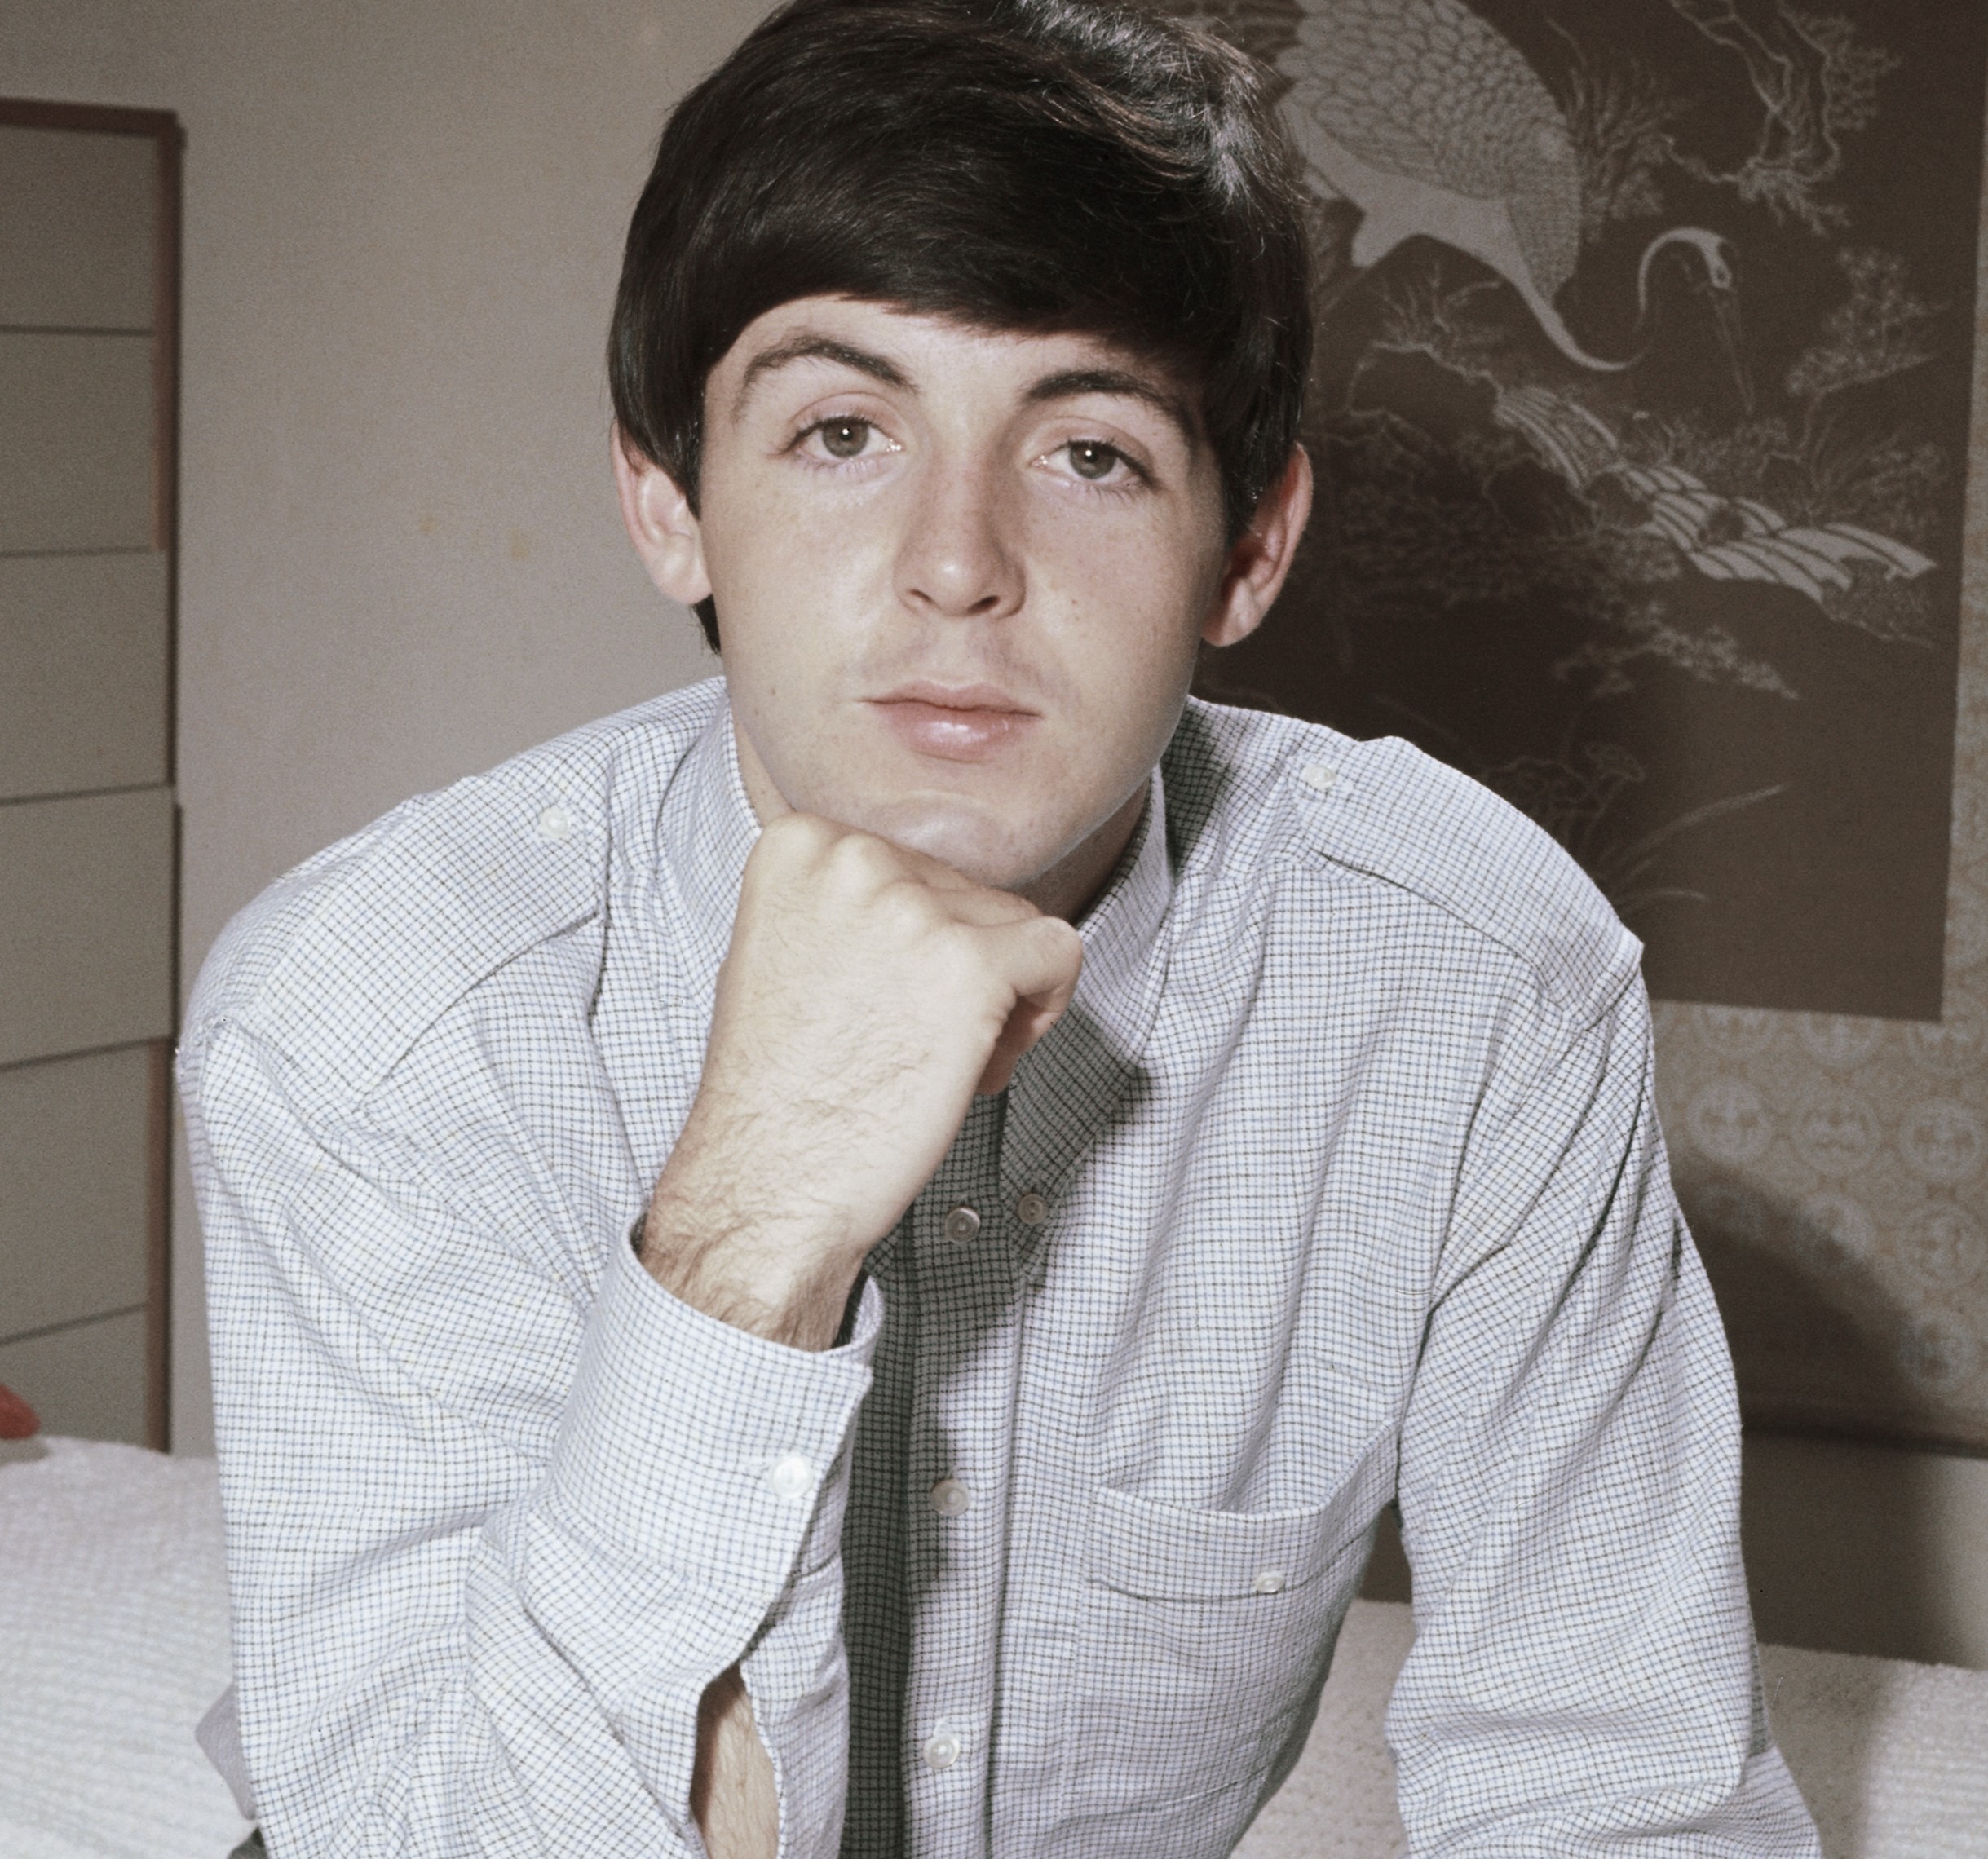 Paul McCartney with his head on his hand